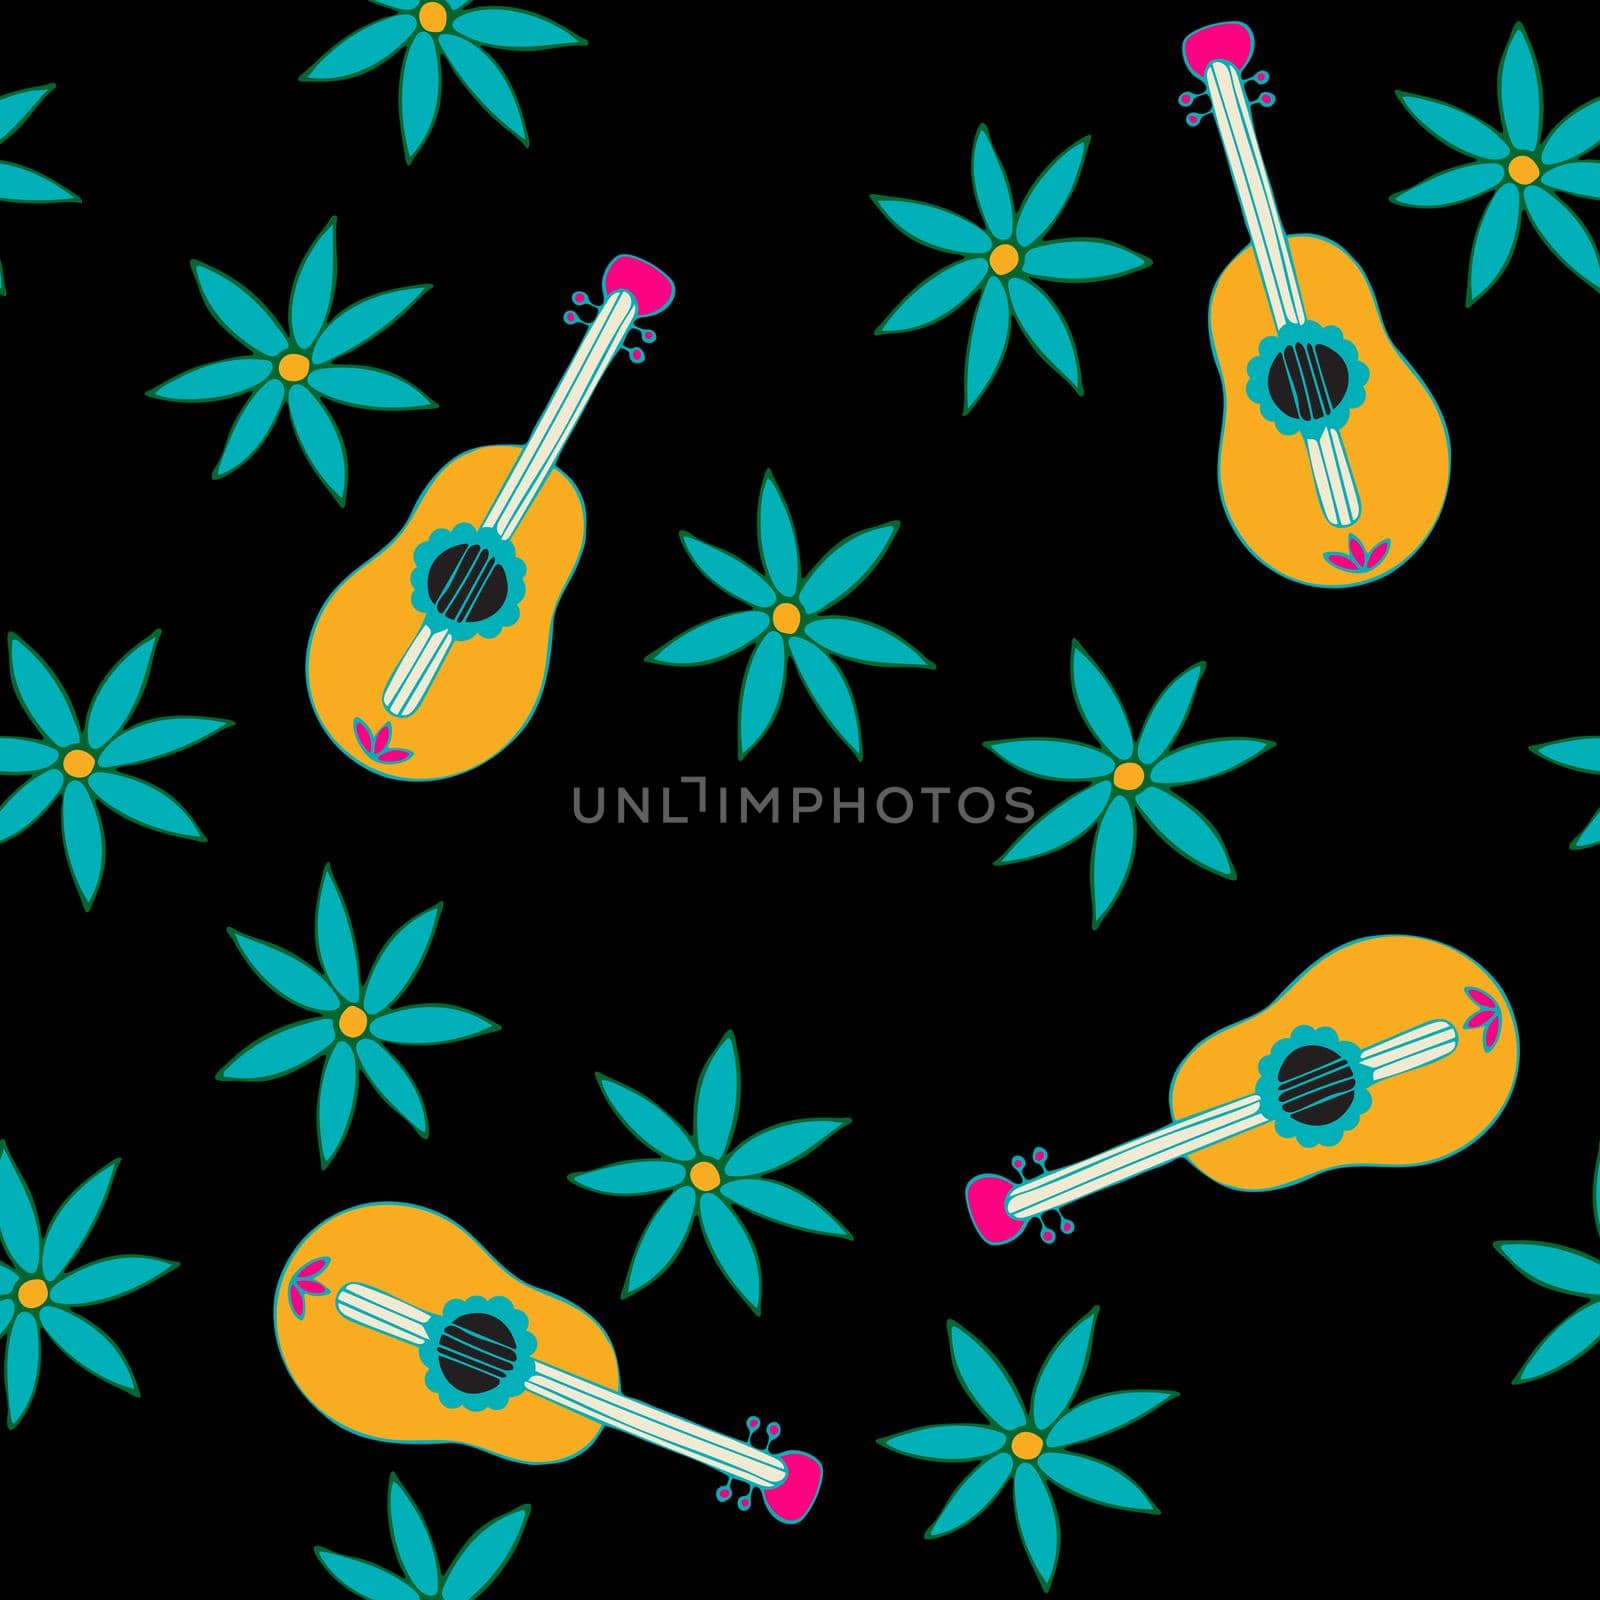 Seamless Repeat Pattern with Flowers and Guitar on black background. Hand drawn fabric, gift wrap, wall art design.